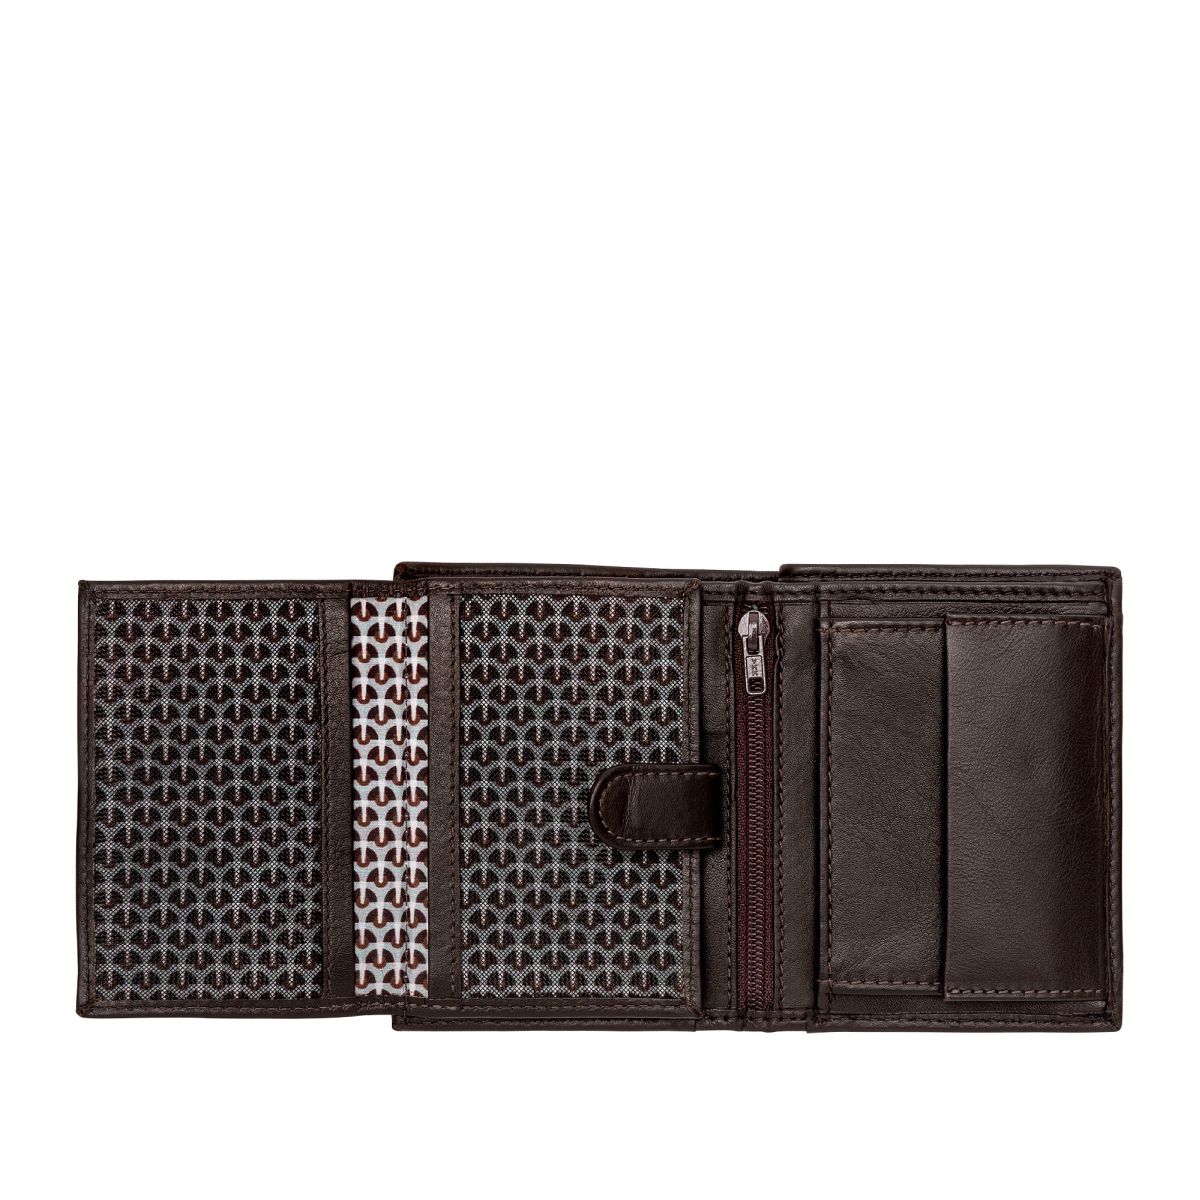 NUVOLA PELLE Small mens wallet with coin pocket - Dark Brown